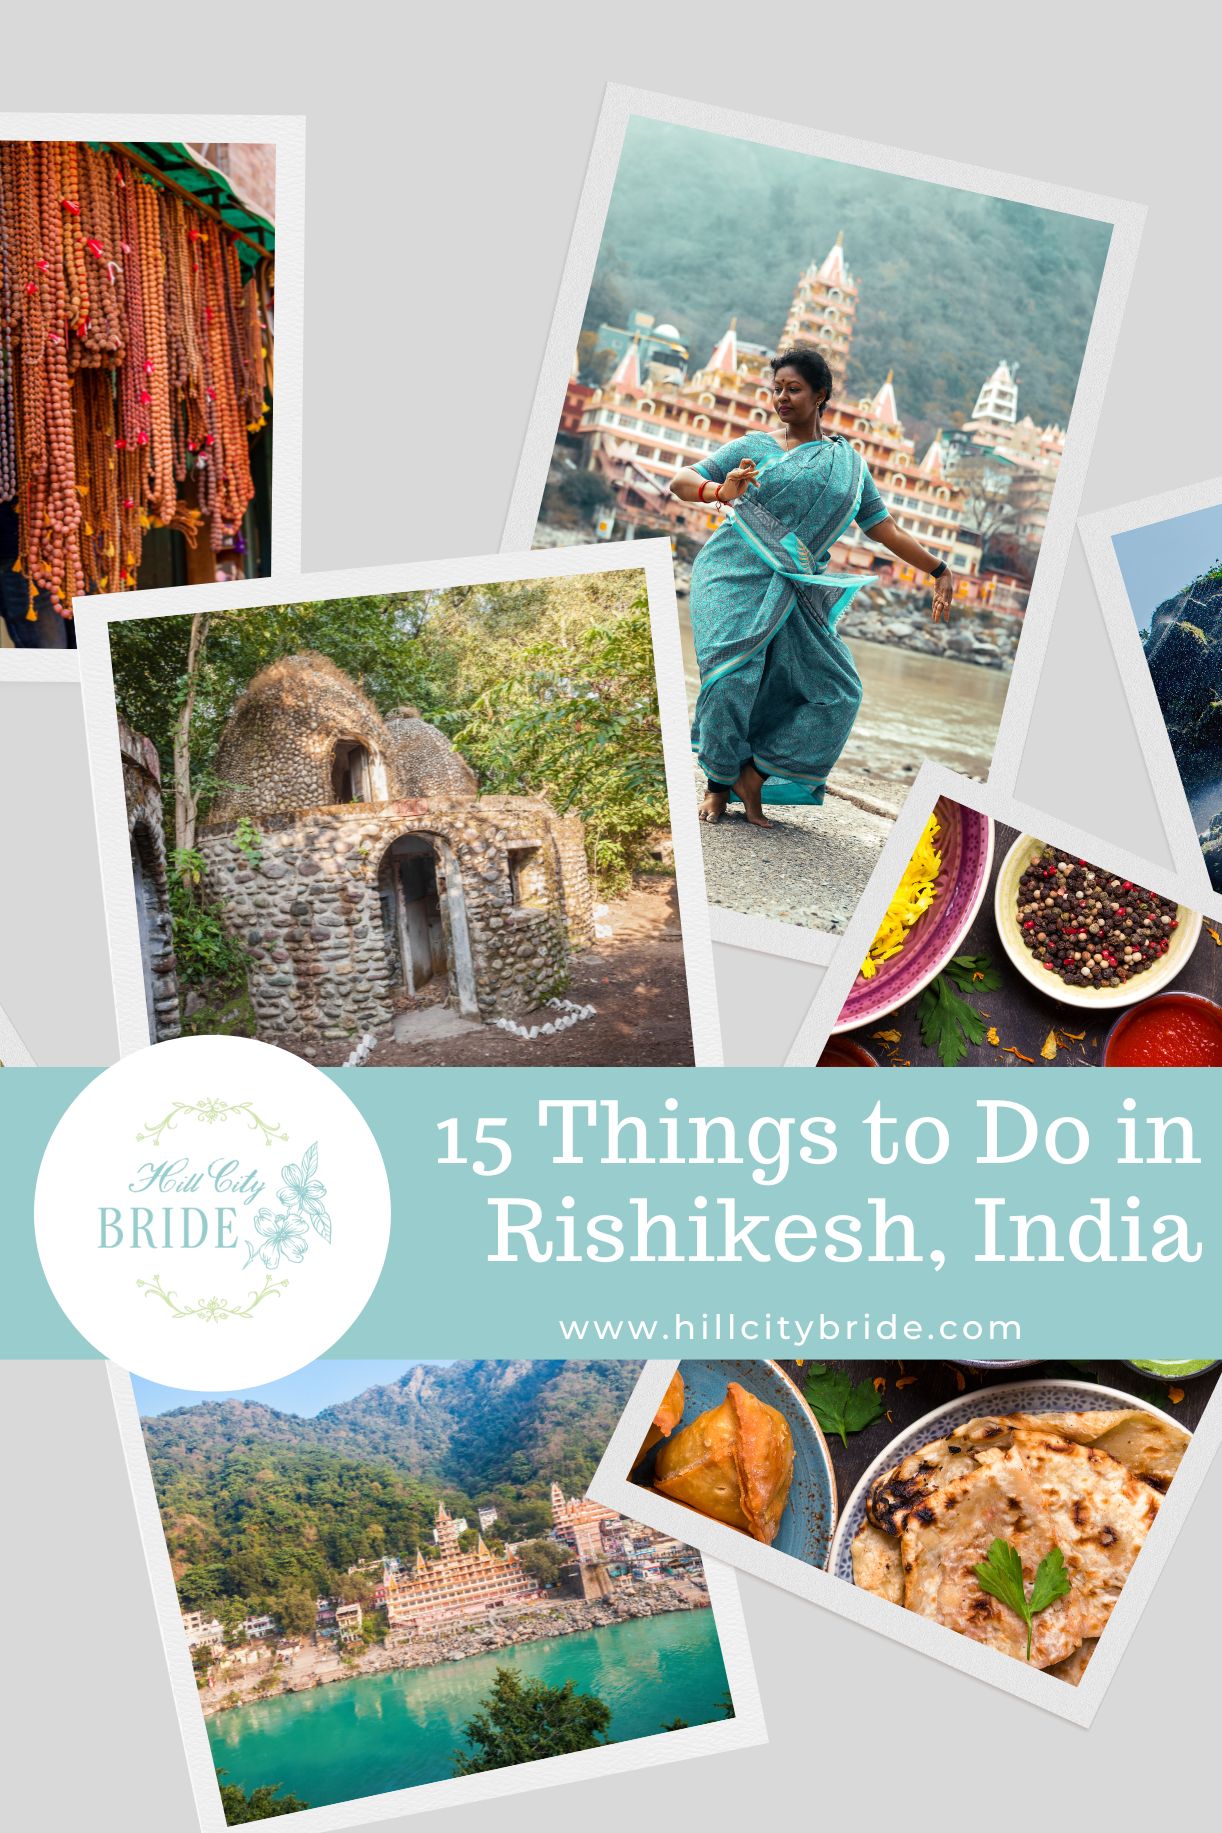 Best Things to Do in Rishikesh for Couples